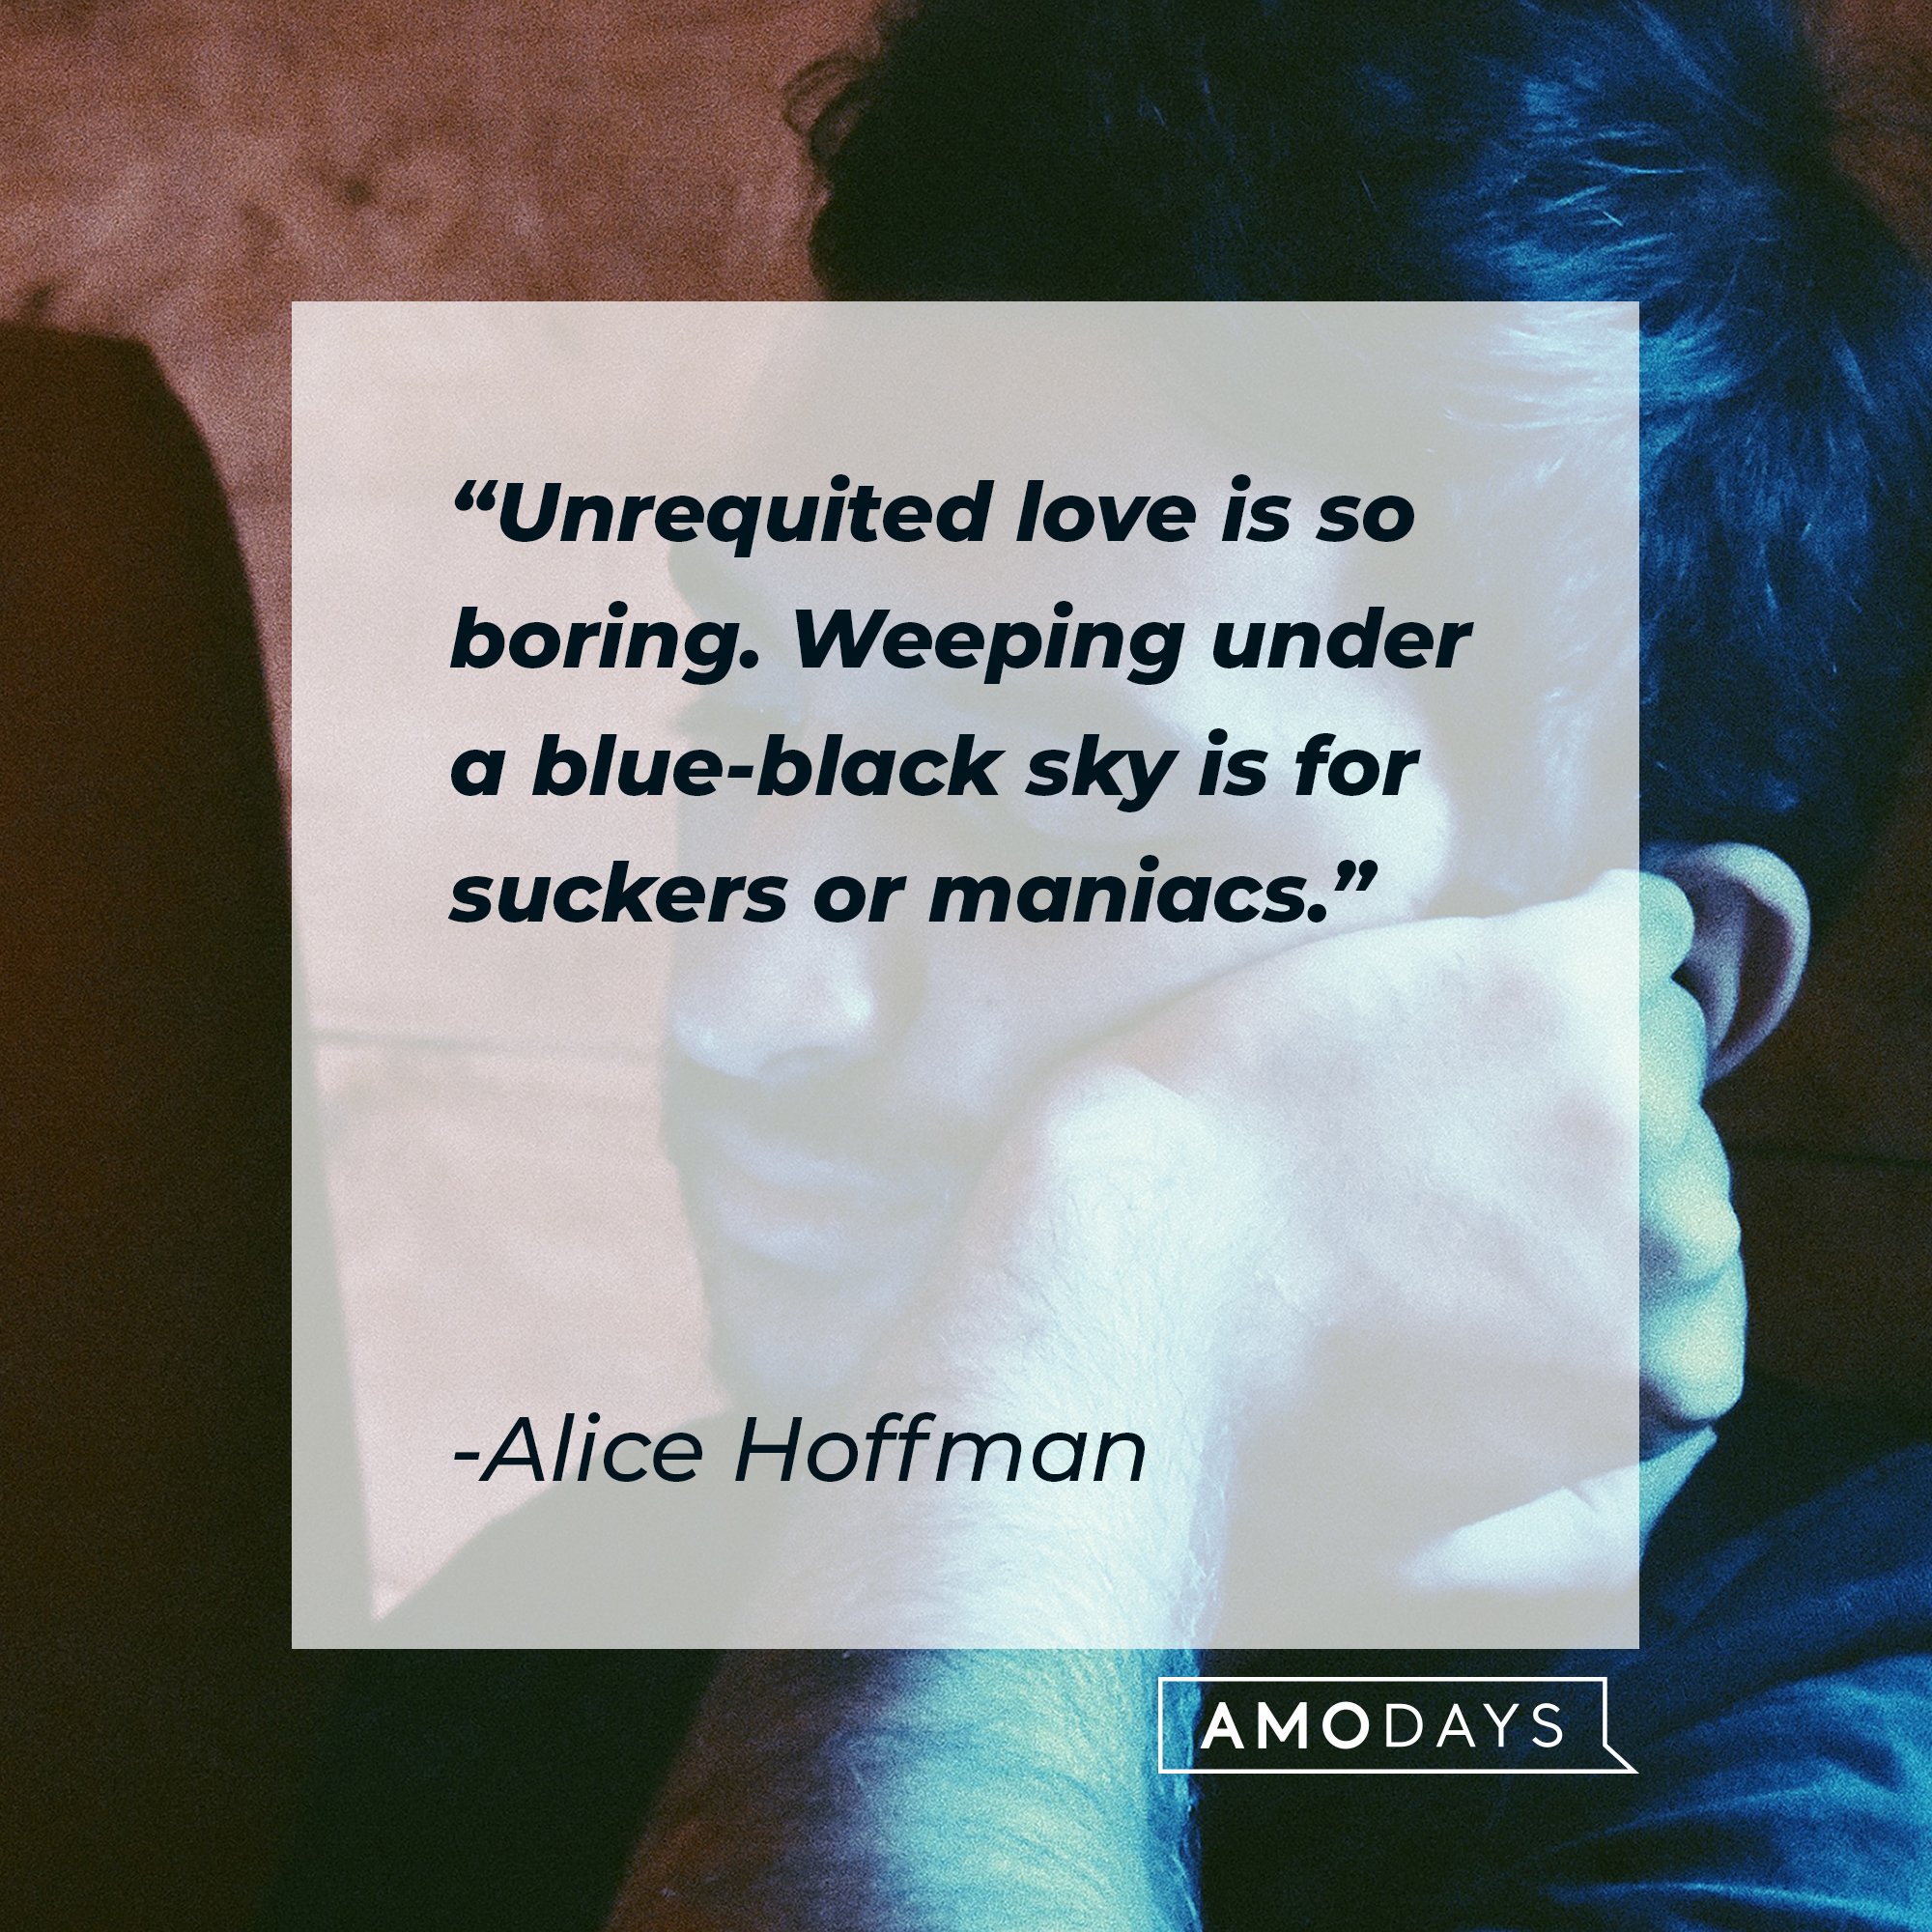  Alice Hoffman’s quote: "Unrequited love is so boring. Weeping under a blue-black sky is for suckers or maniacs." | Image: AmoDays